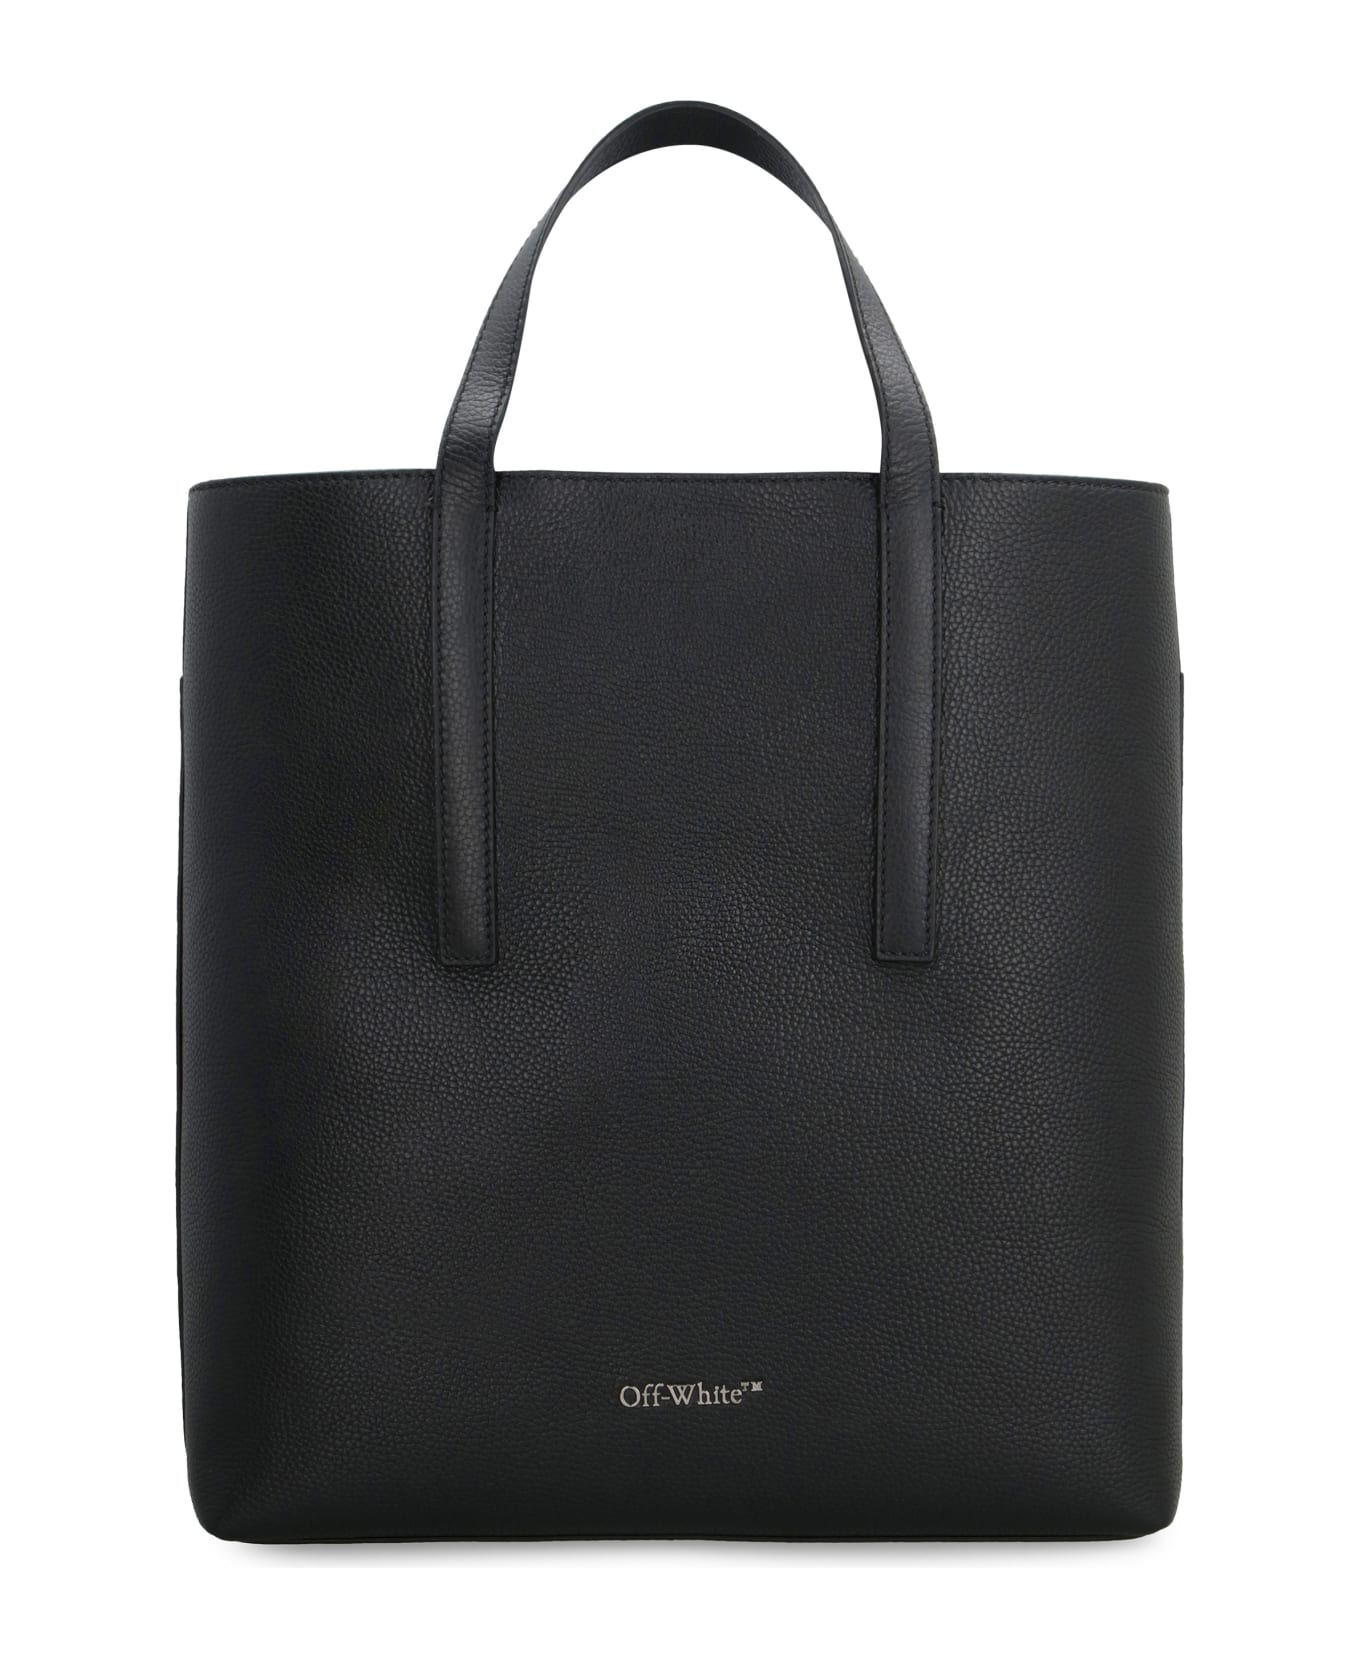 Off-White Binder Leather Tote - black